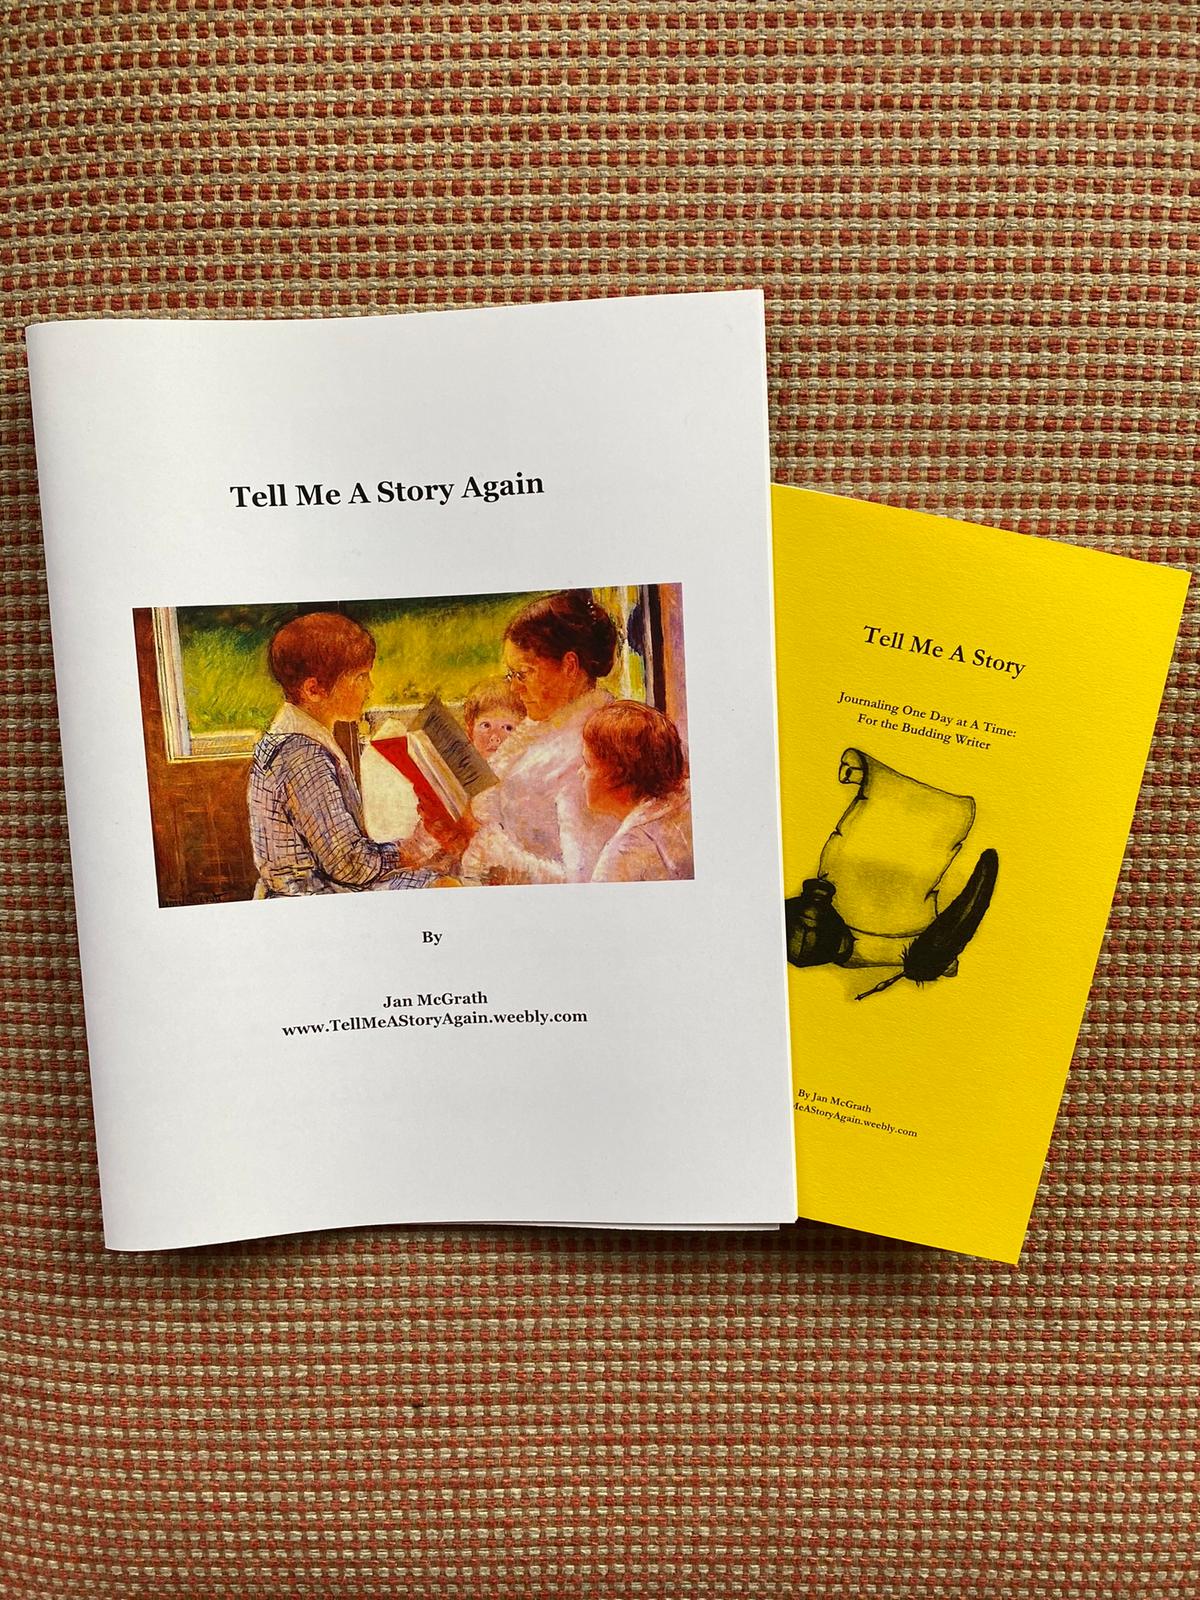 "Tell Me a Story" and "Tell Me a Story Again" by Jan McGrath. (Courtesy of Jan McGrath)